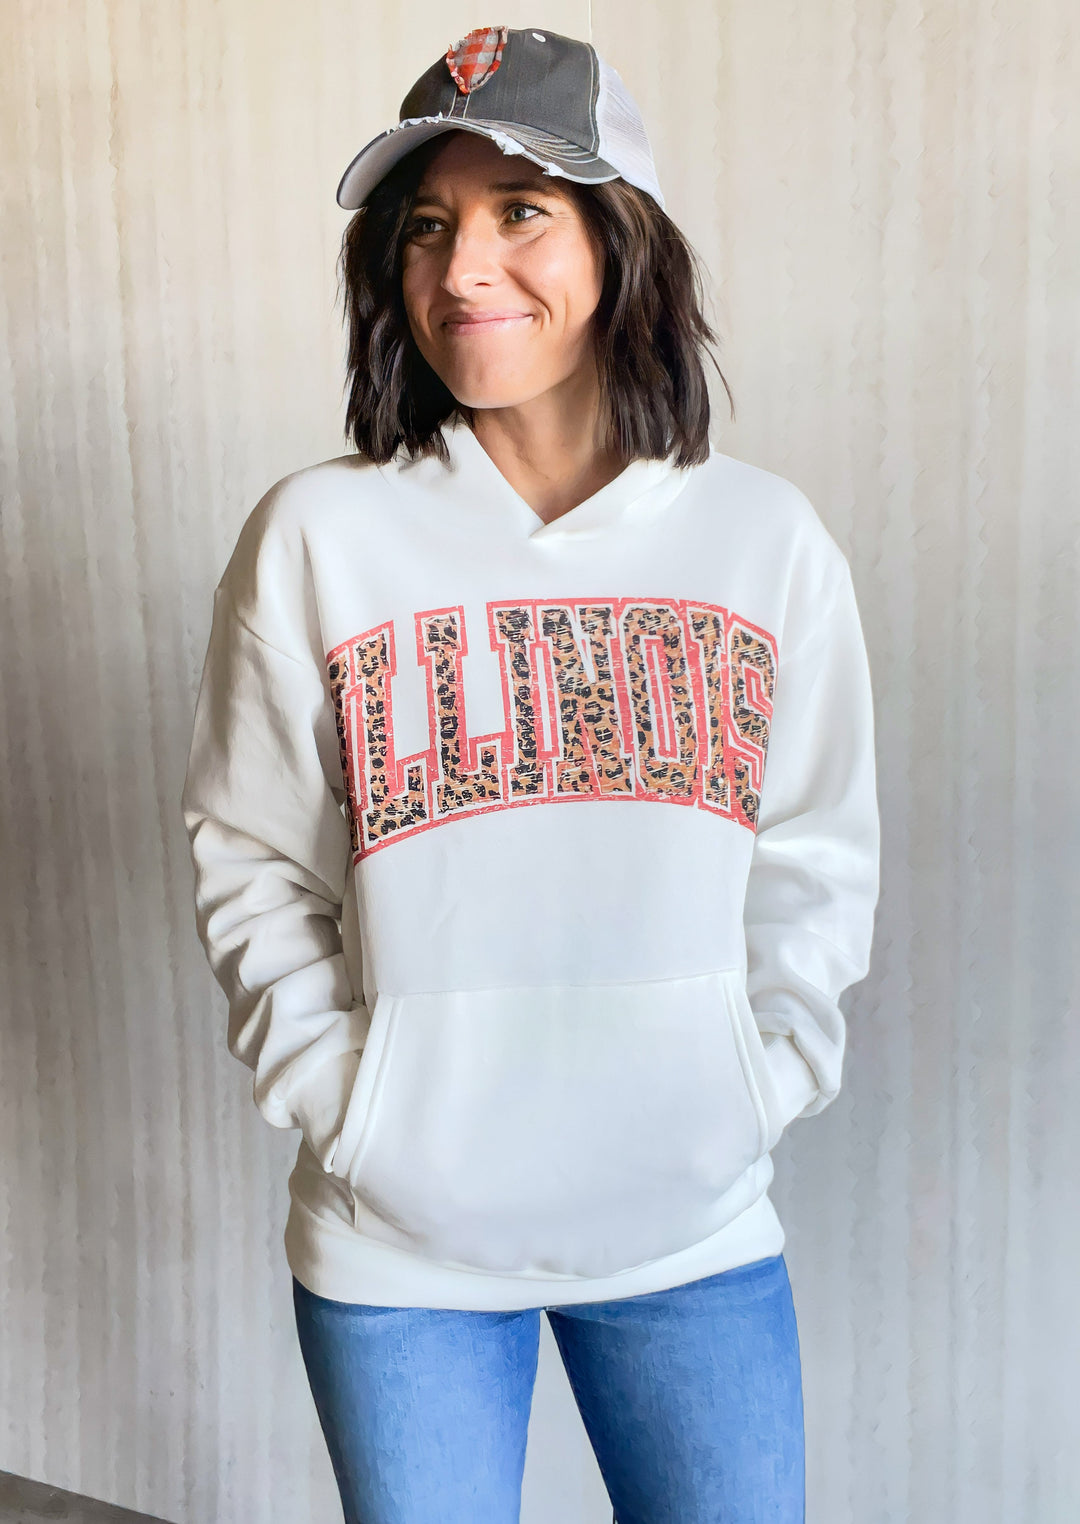 Illinois Hoodie White Sweatshirt with Illinois text across the chest in a leopard print with orange outline